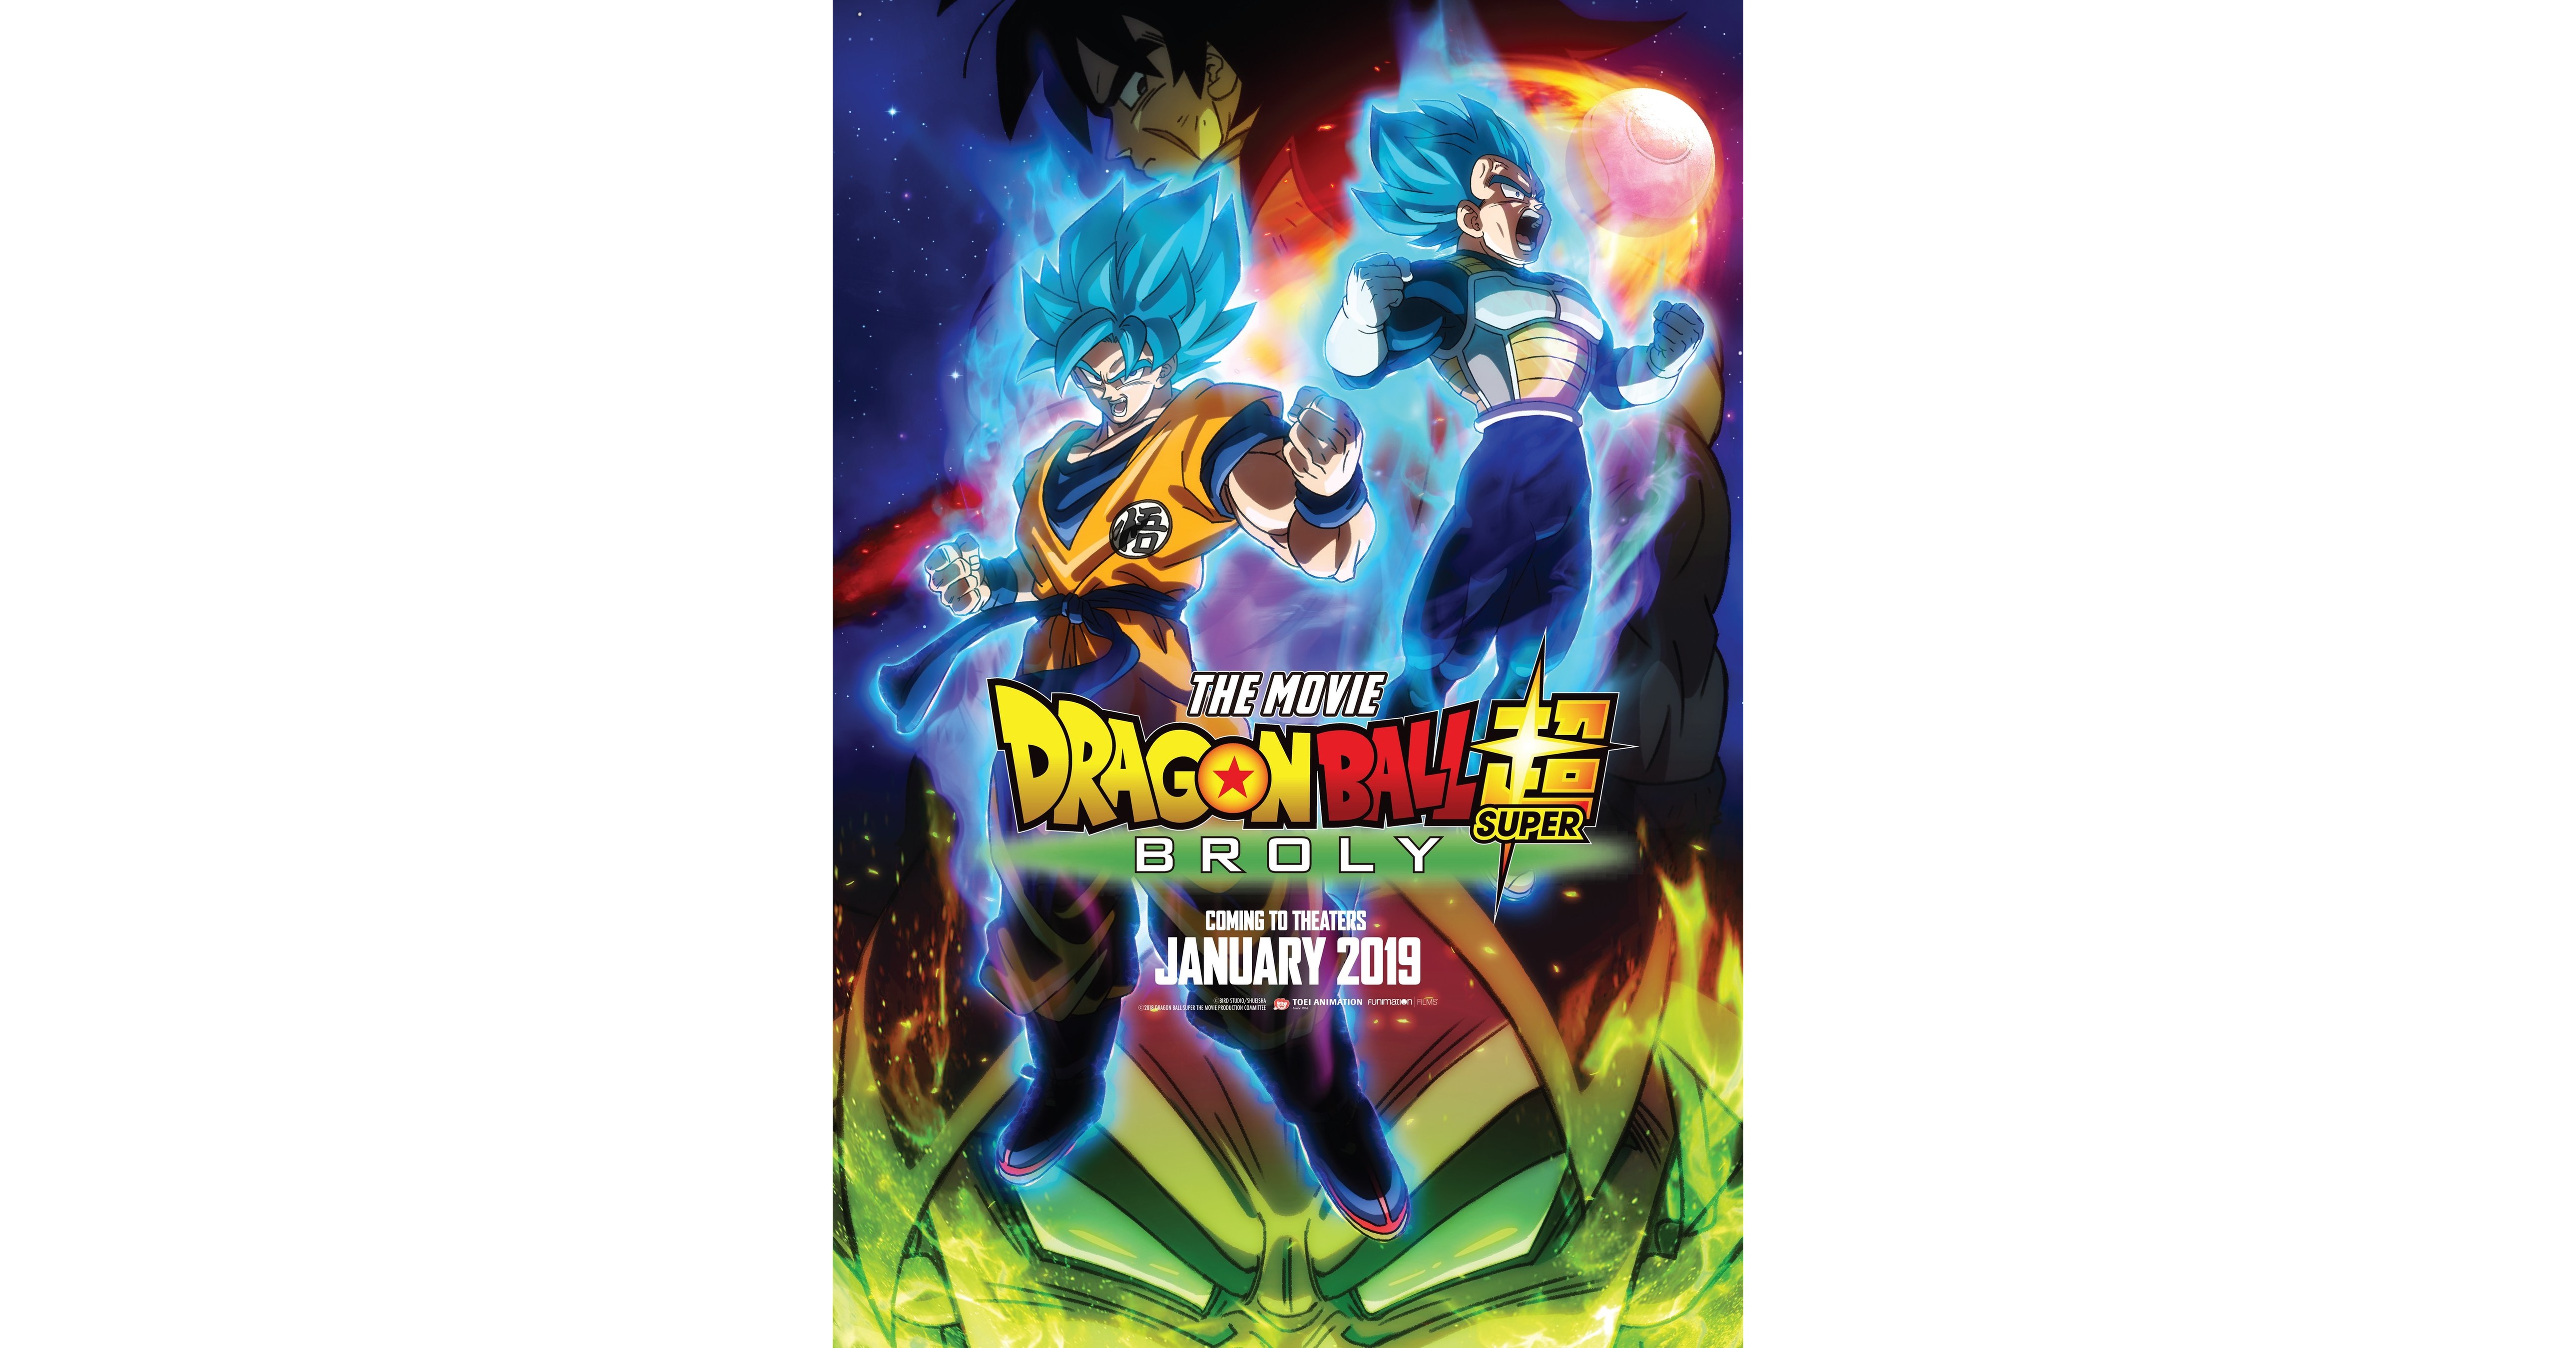 Akira Toriyama S Dragon Ball Super Broly Opens Tomorrow January 16 For Its Highly Anticipated North American Theatrical Run